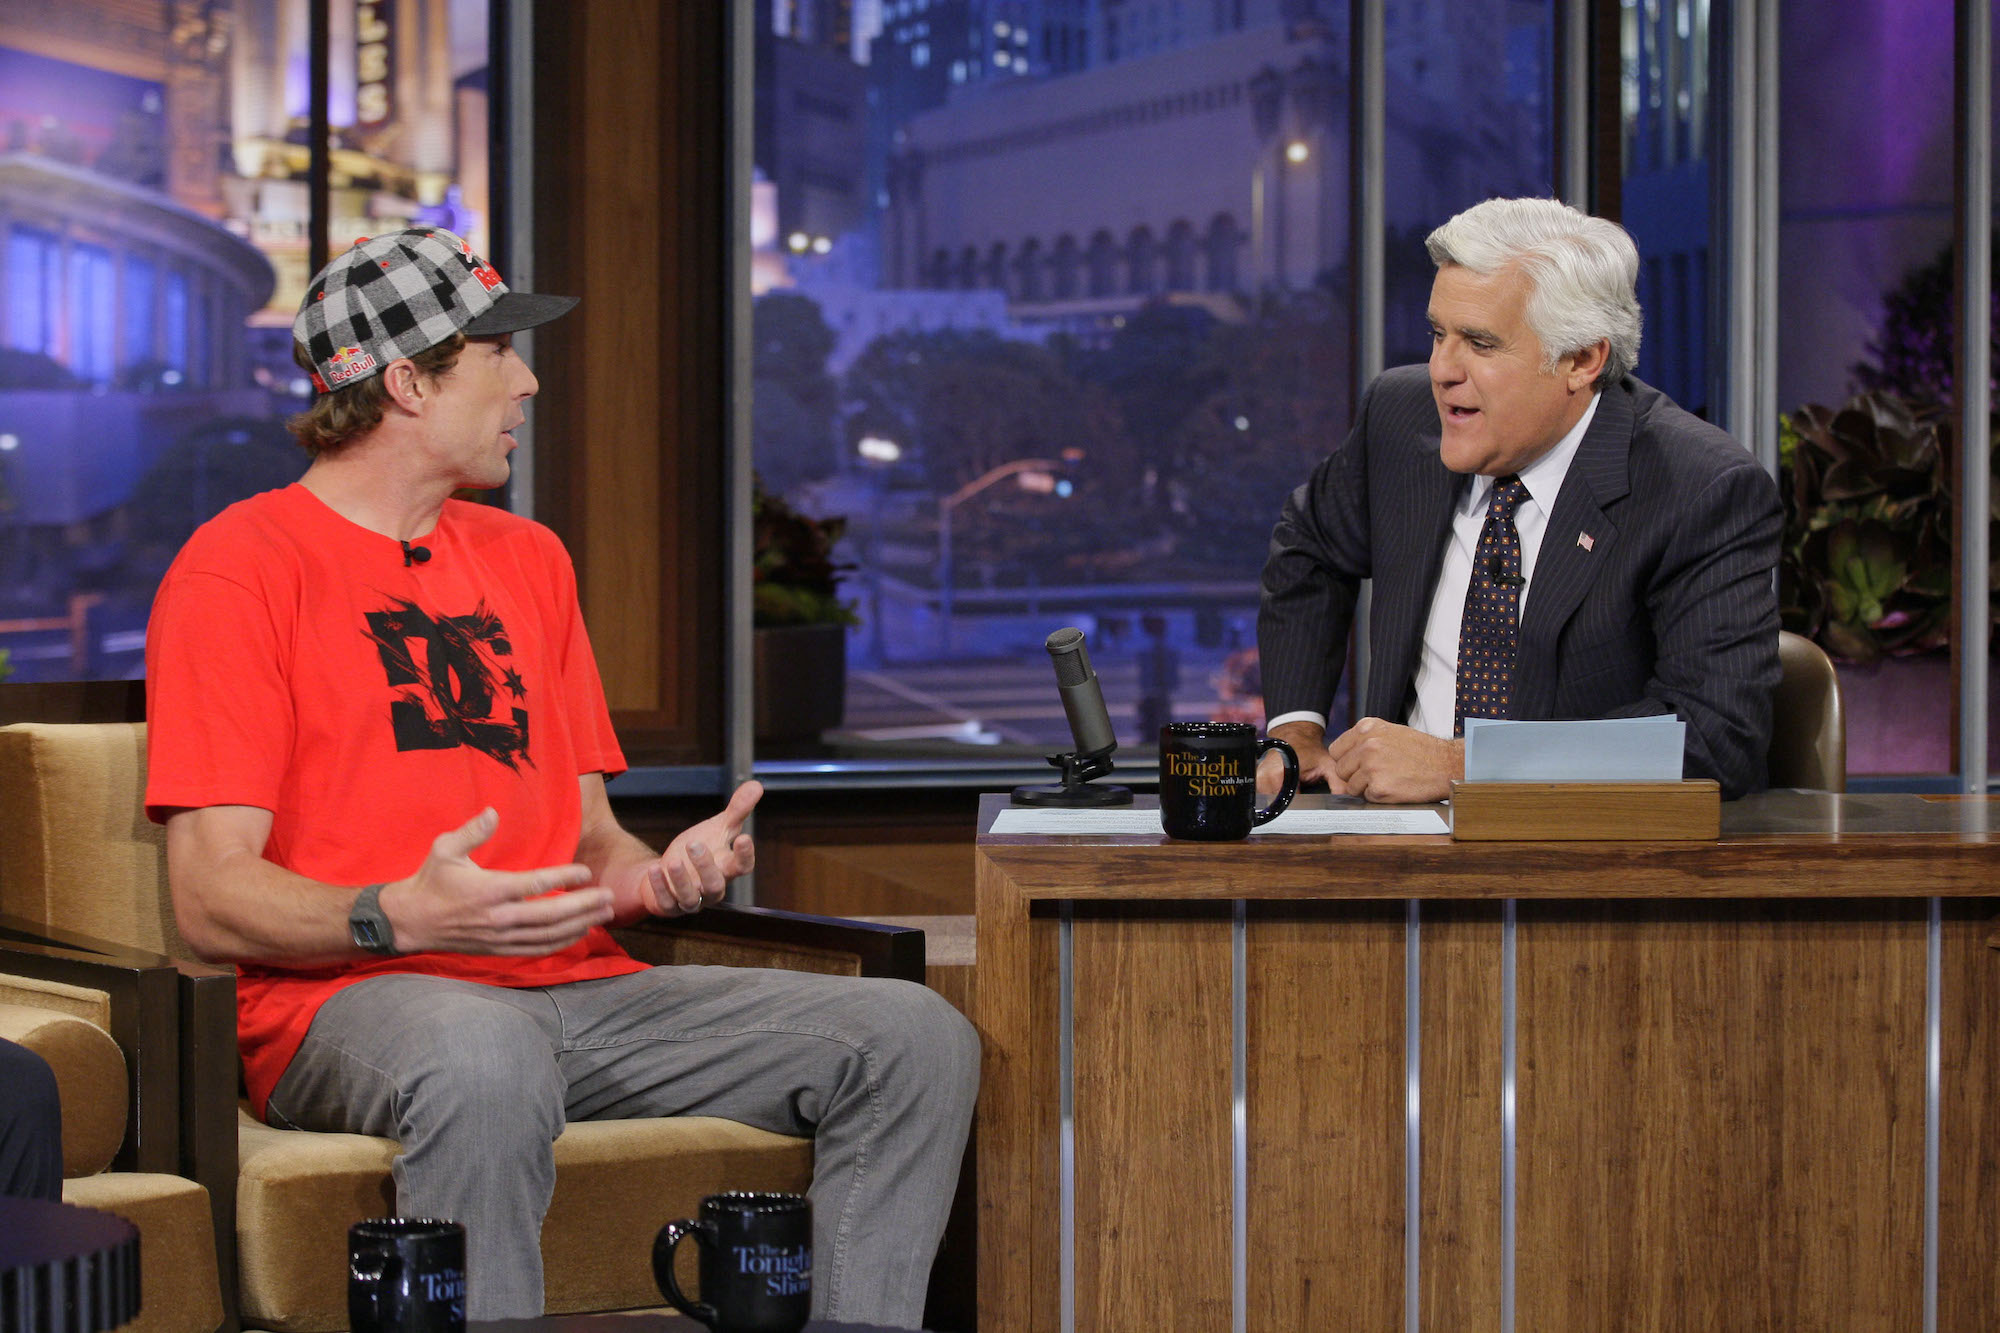 Extreme athlete Travis Pastrana during an interview with host Jay Leno on July 23, 2012.